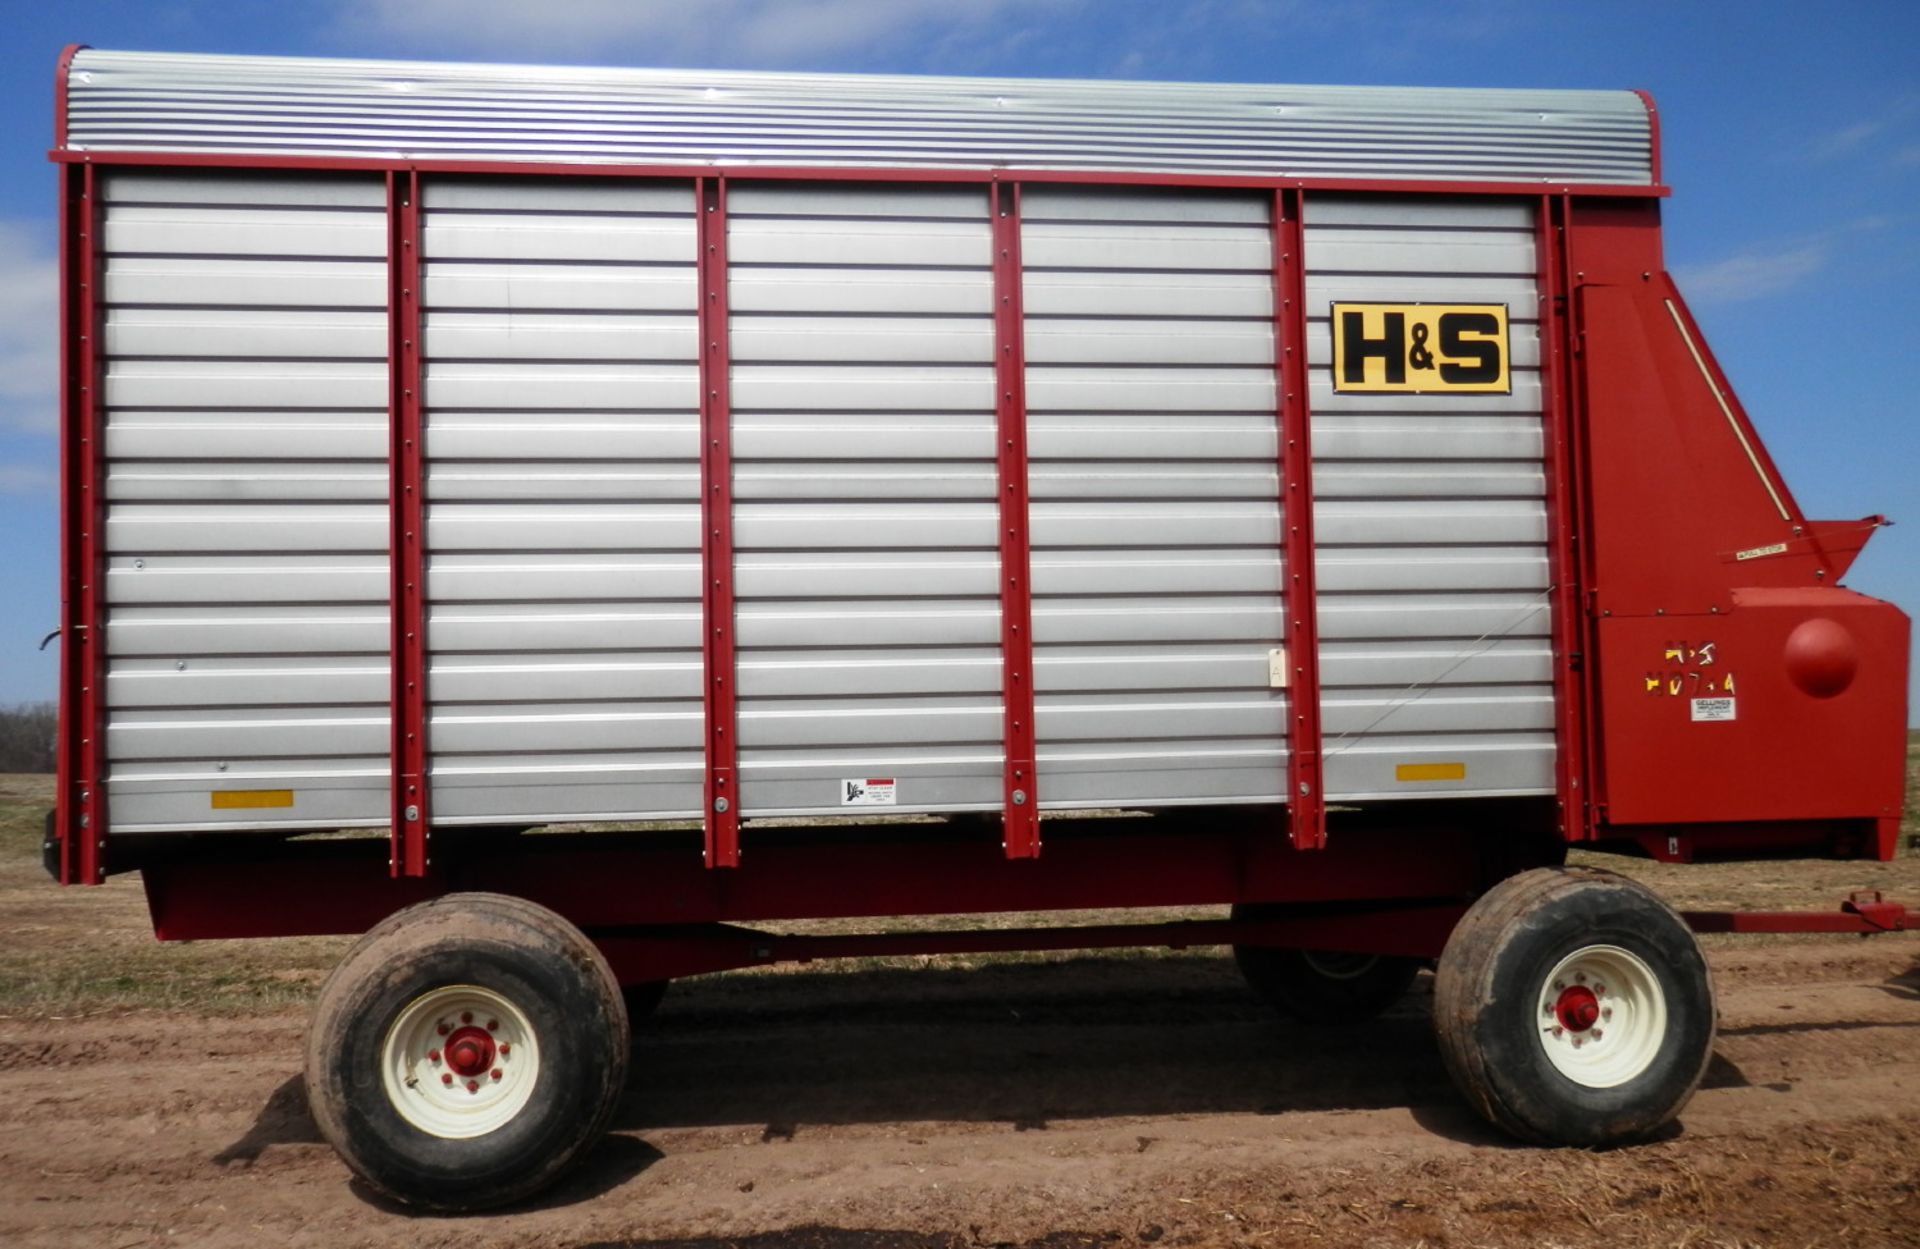 H&S 7+4 HD 16' LH ALL STEEL FORAGE BOX (WAGON A) SN 908795 - Image 3 of 11